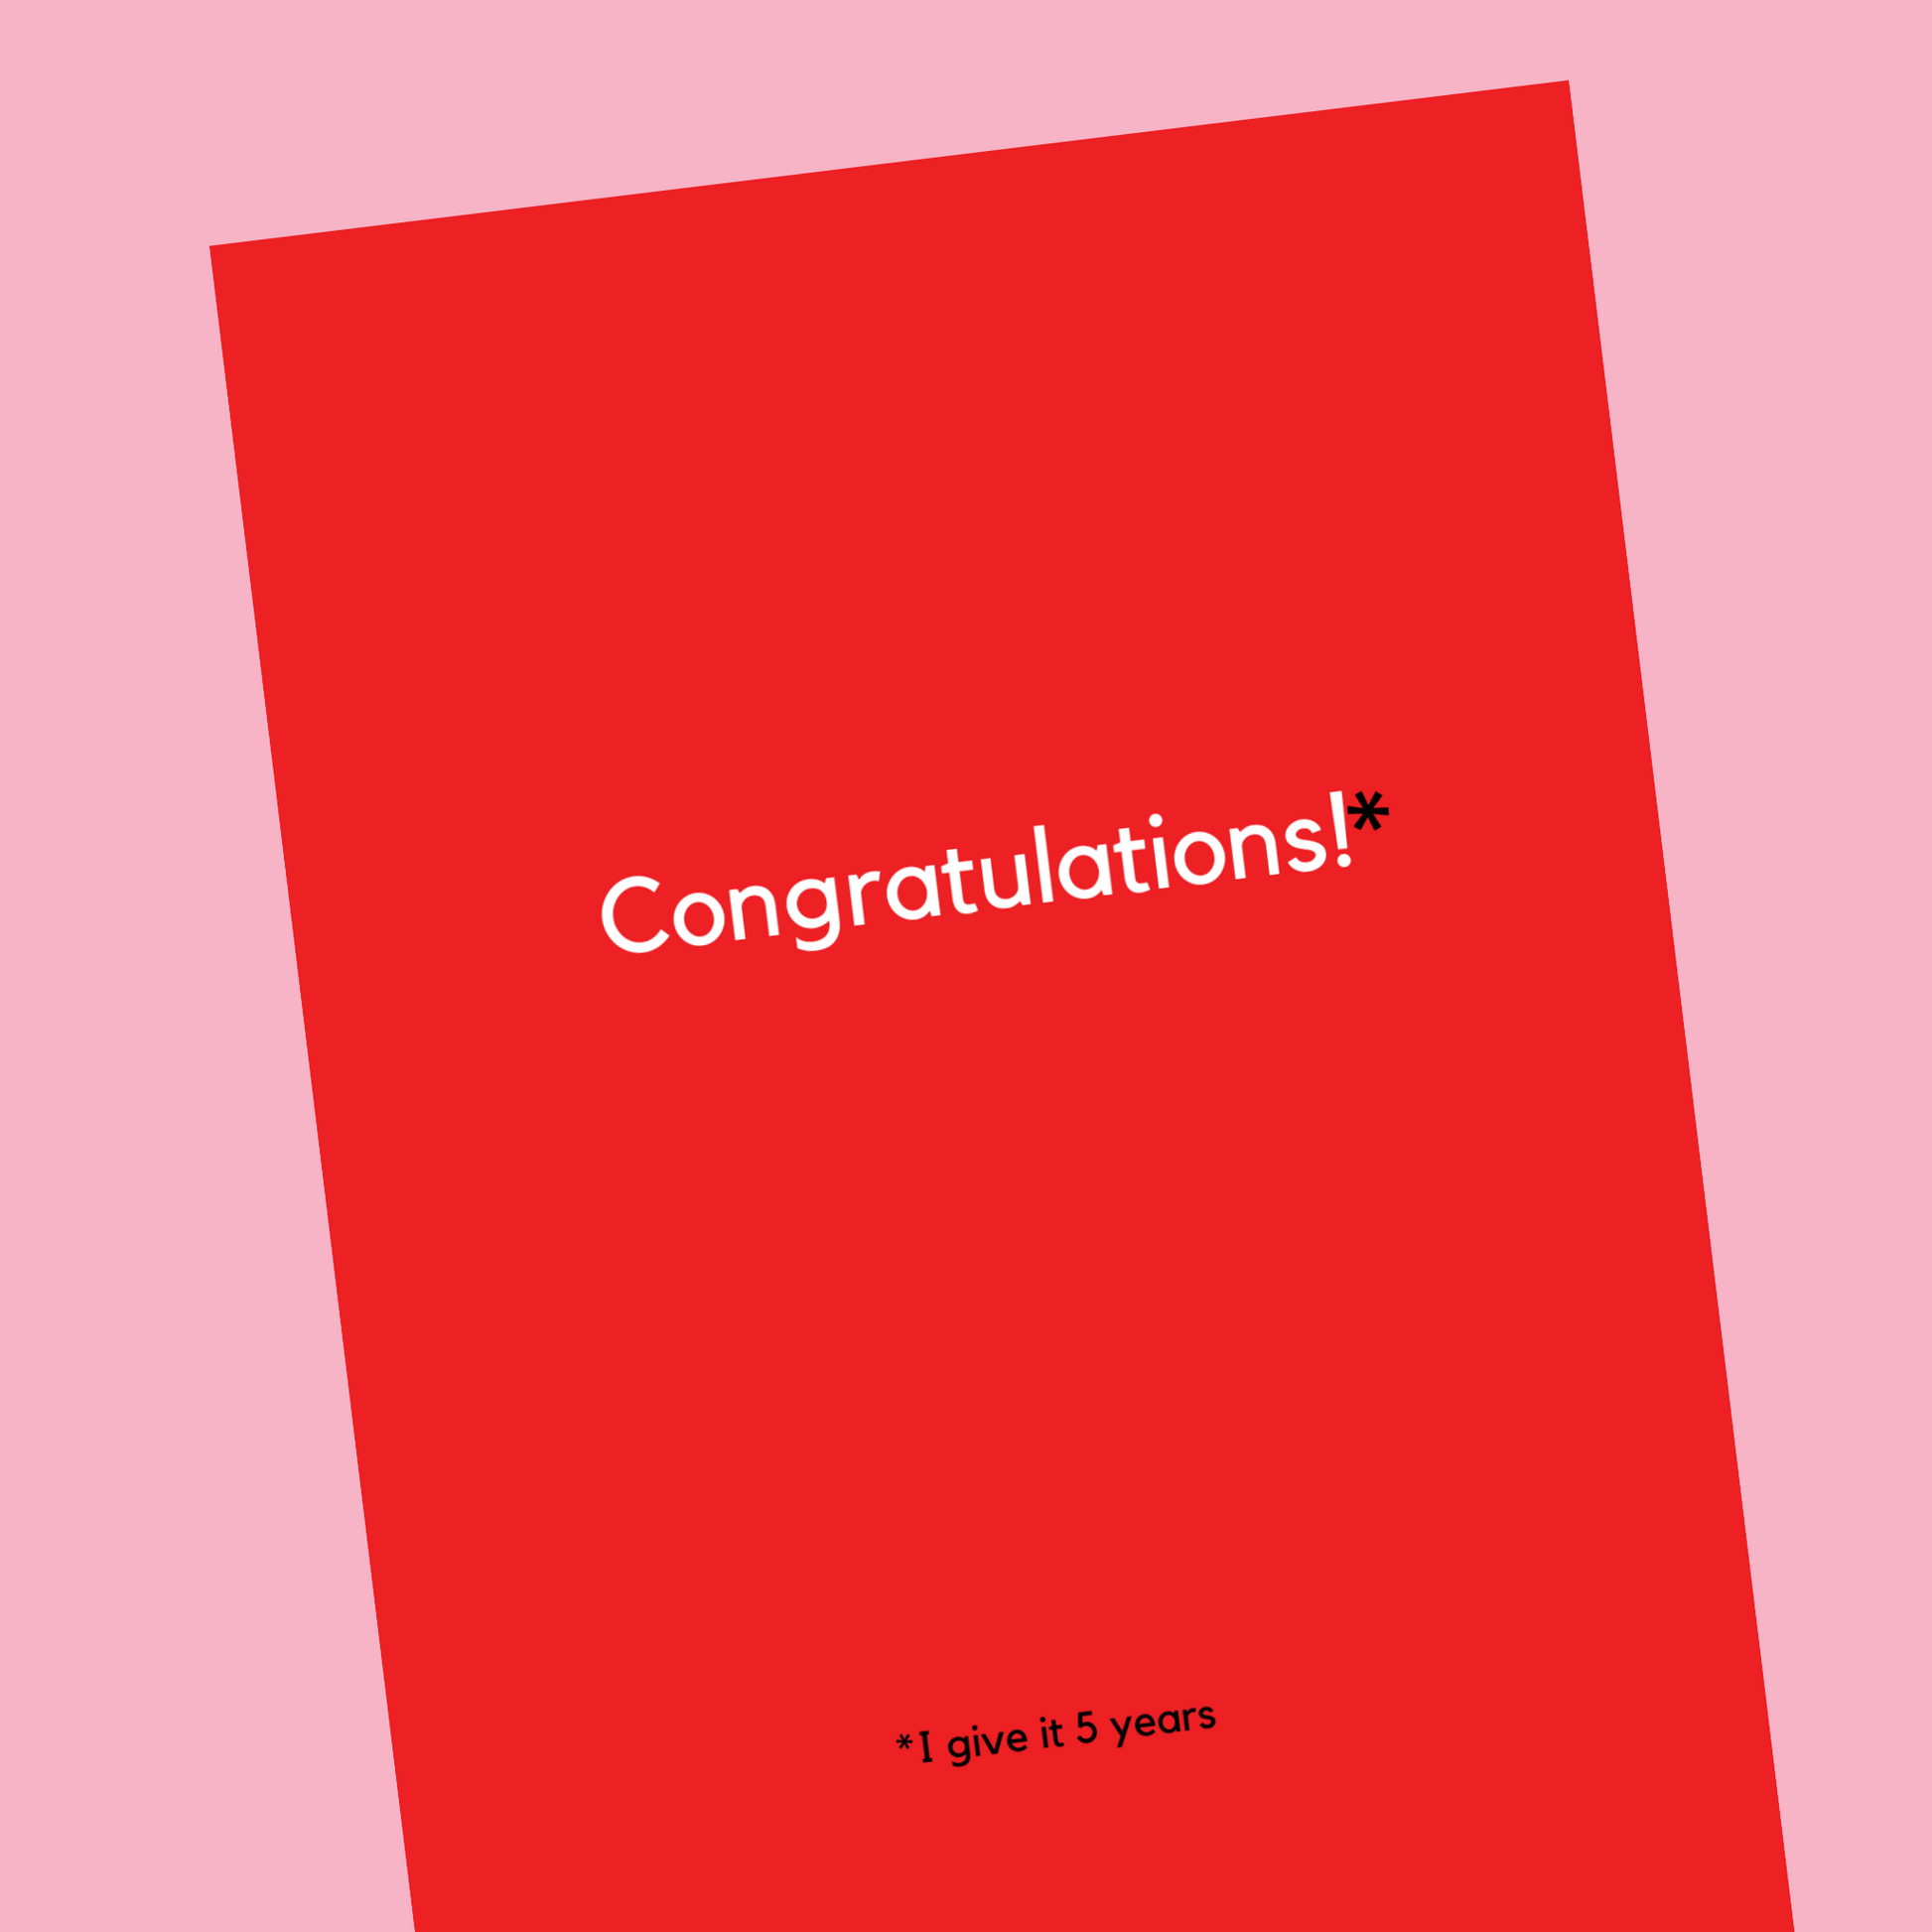 A sassy wedding card that says "Congratulations - I give it a year." The card is red with white and black text.